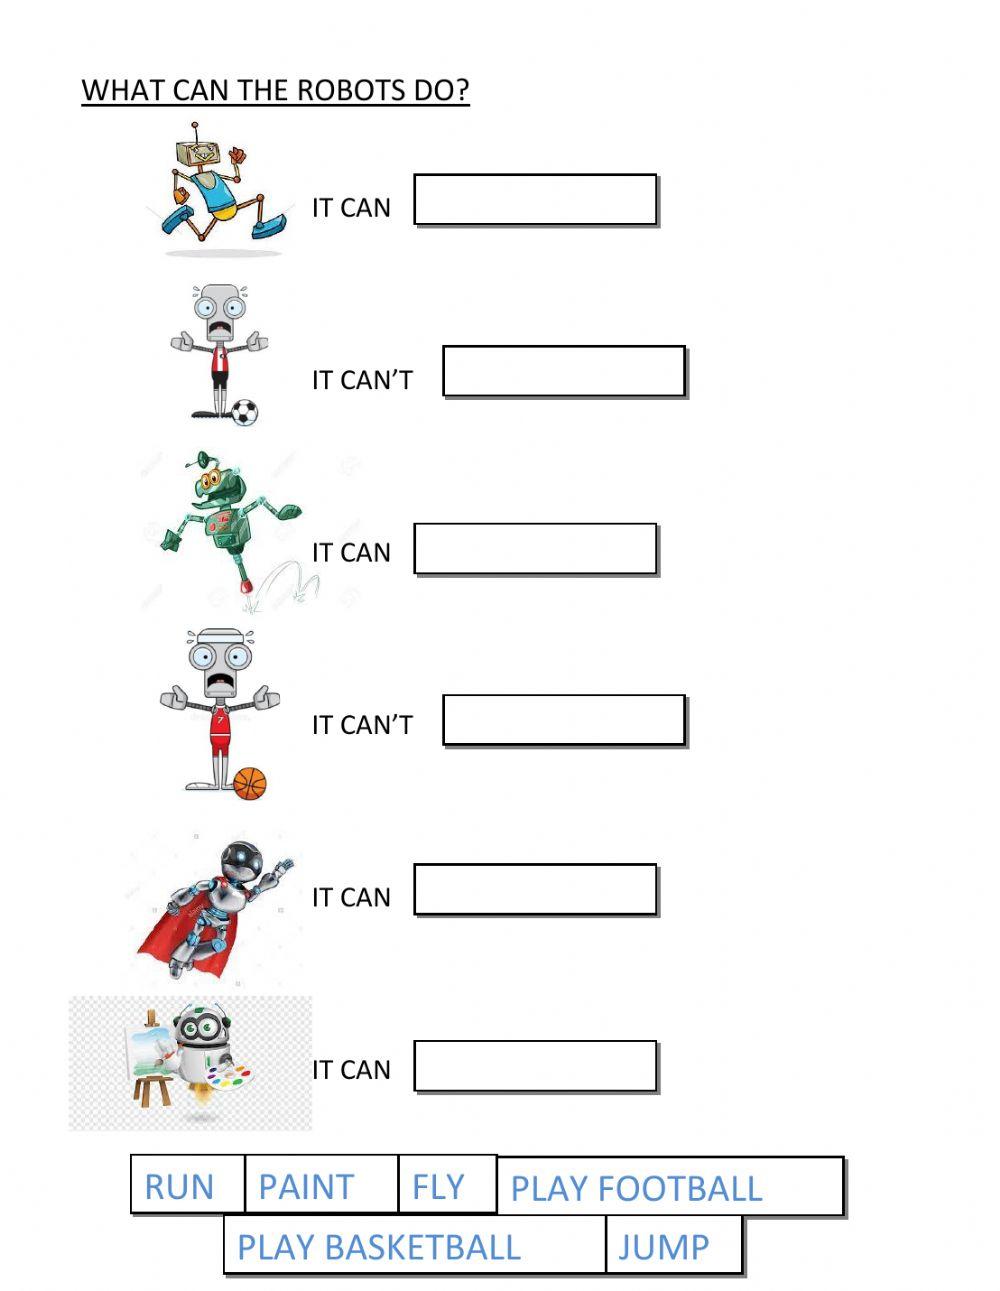 Robots - CAN -CAN'T